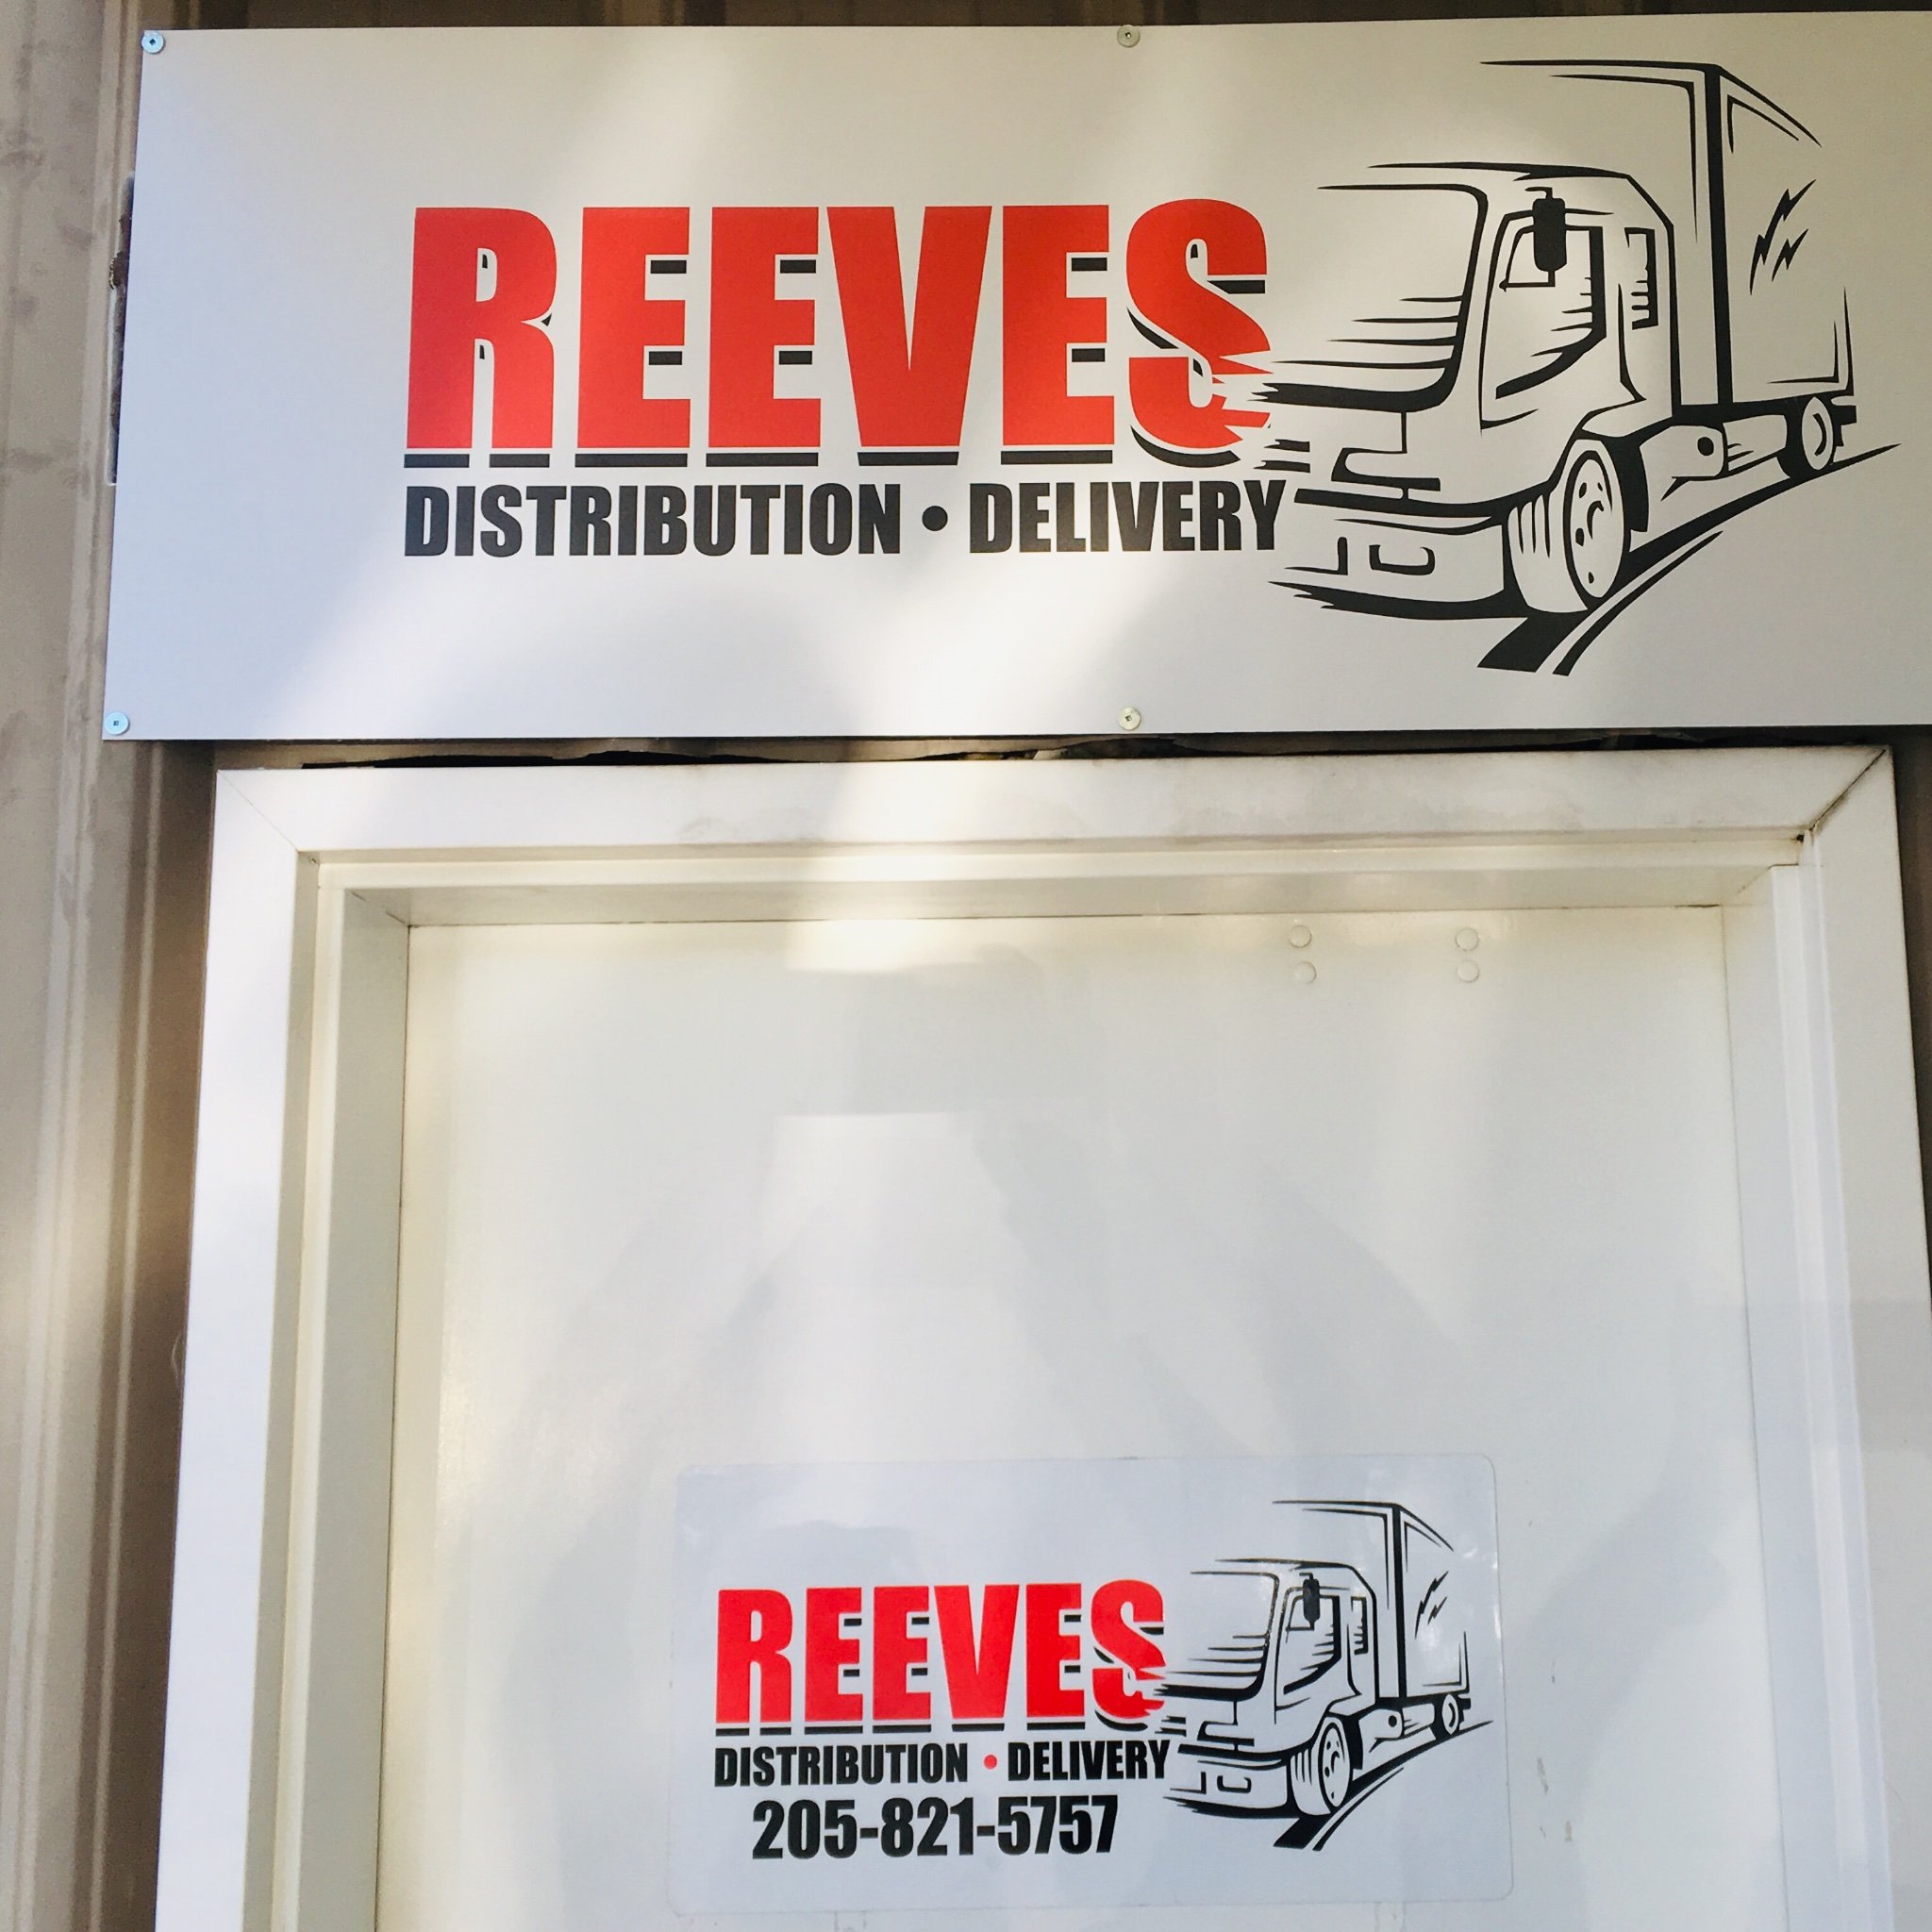 Reeves Distribution & Delivery, LLC, established in 2005, is a small business, owner operated, courier service located in the suburb of Birmingham, AL.